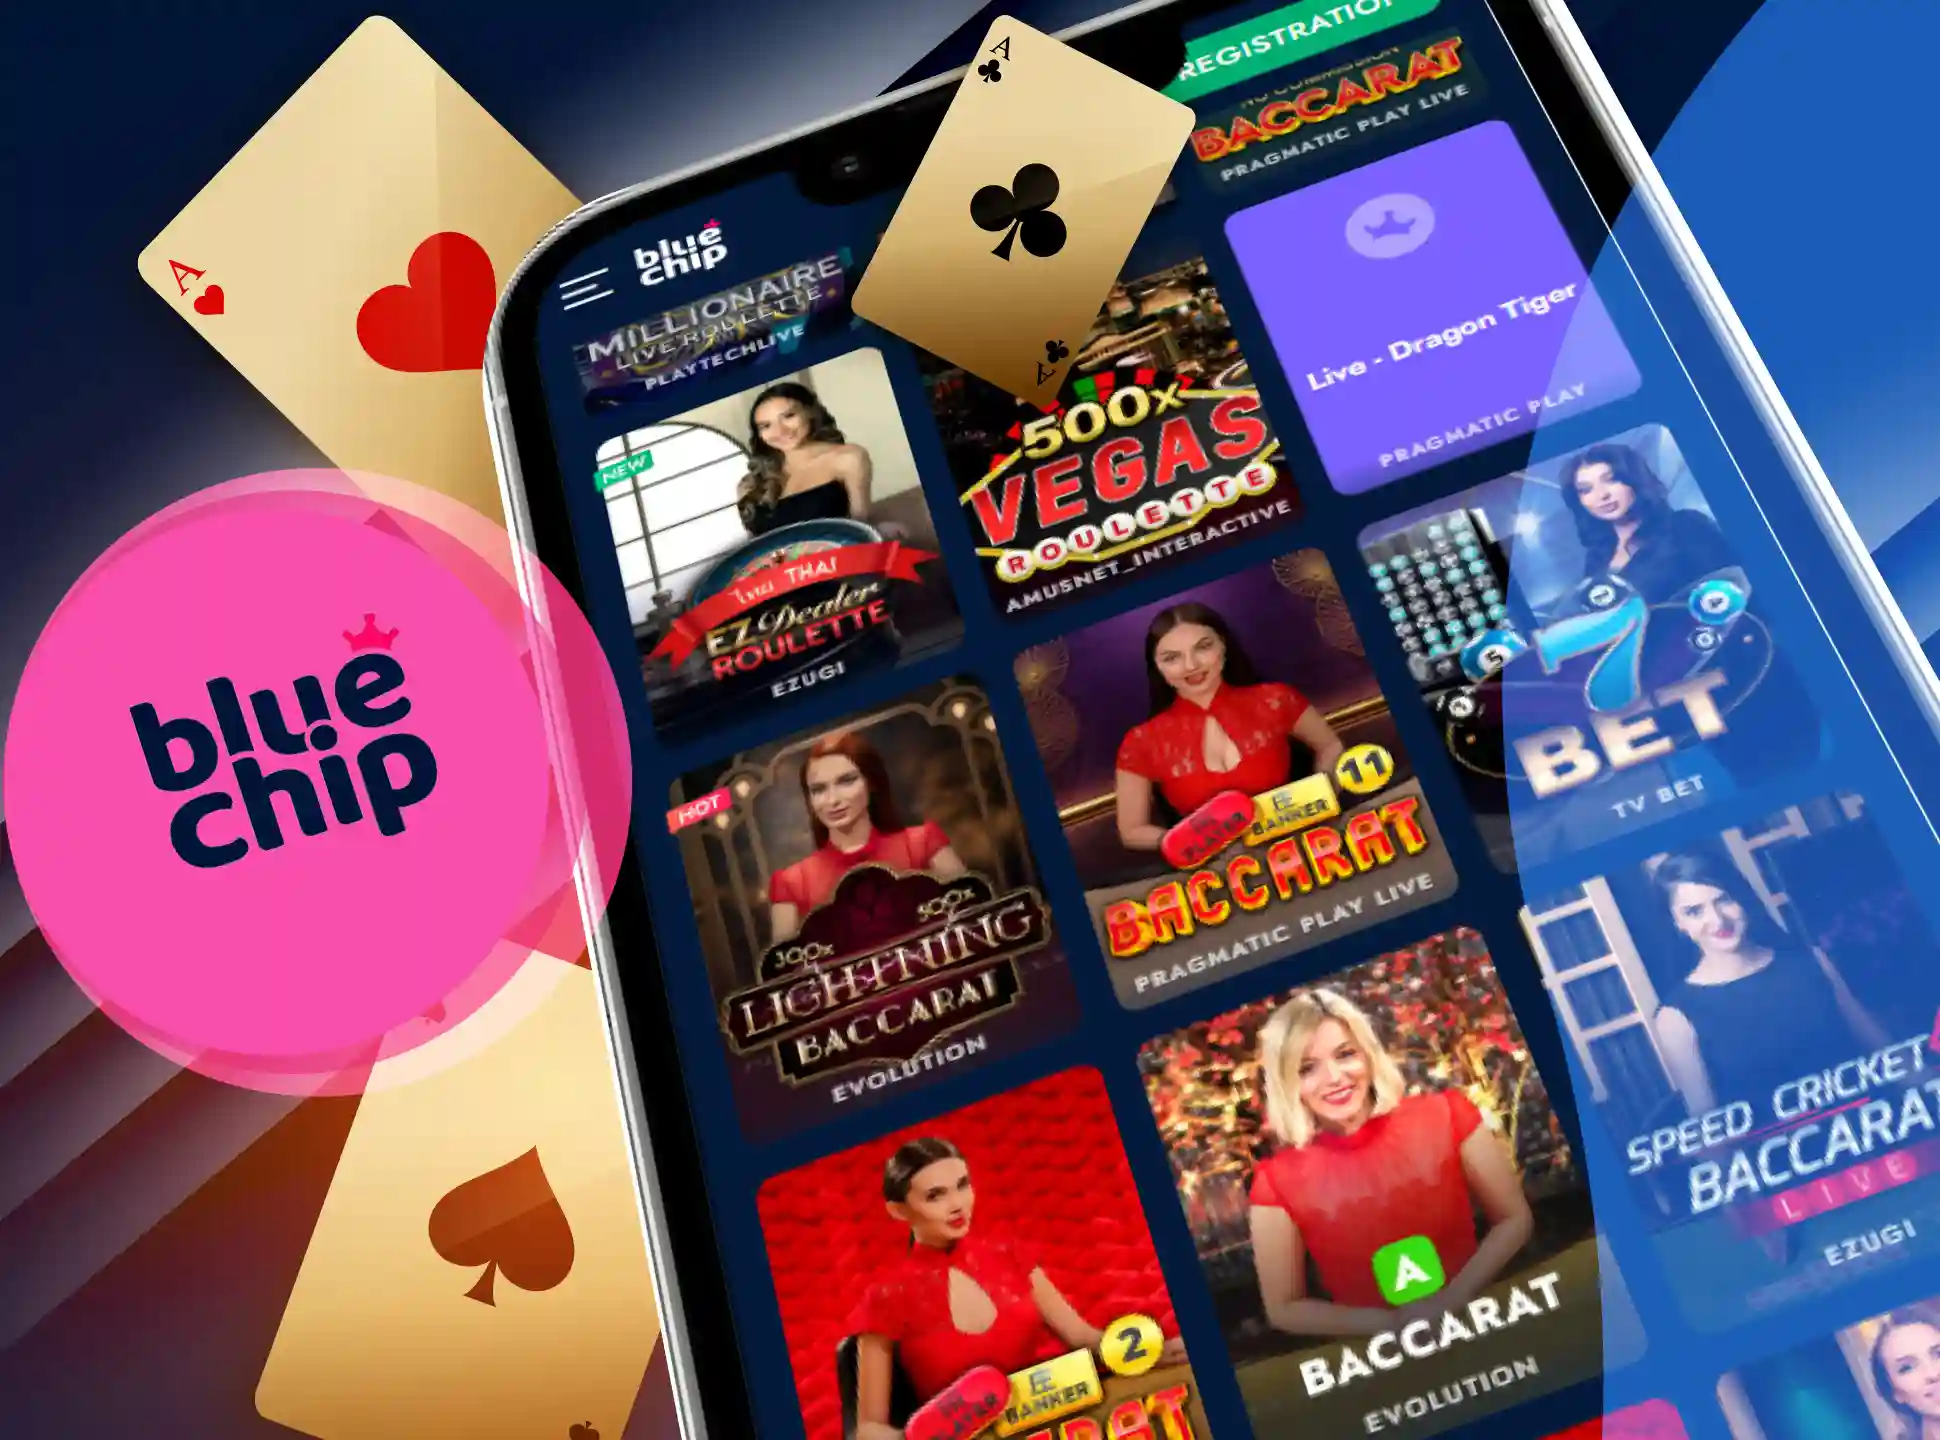 Play poker, blackhack, roulette and other popular casino games in the Bluechip app.